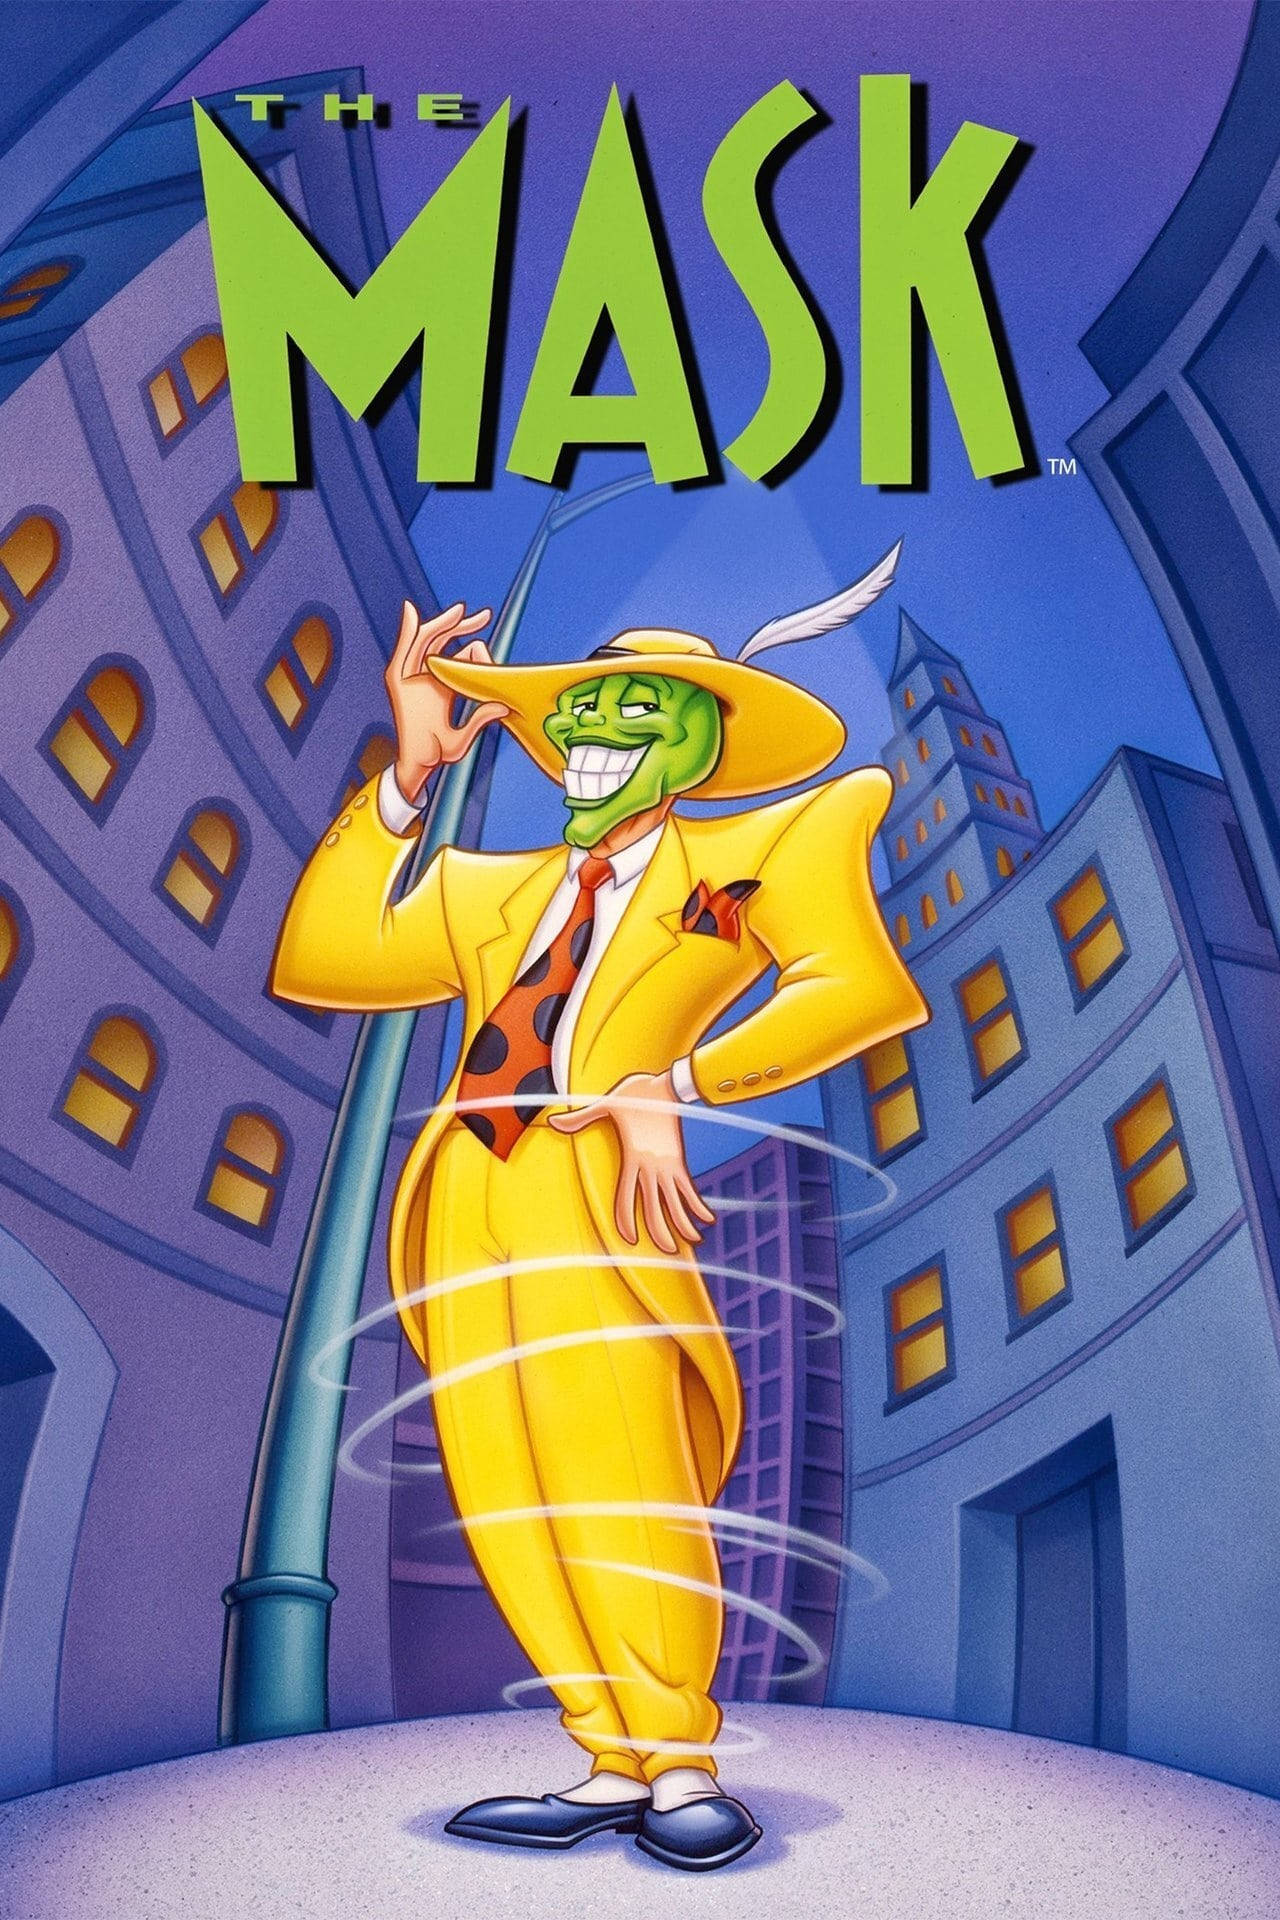 The Mask Grinning Poster Wallpaper